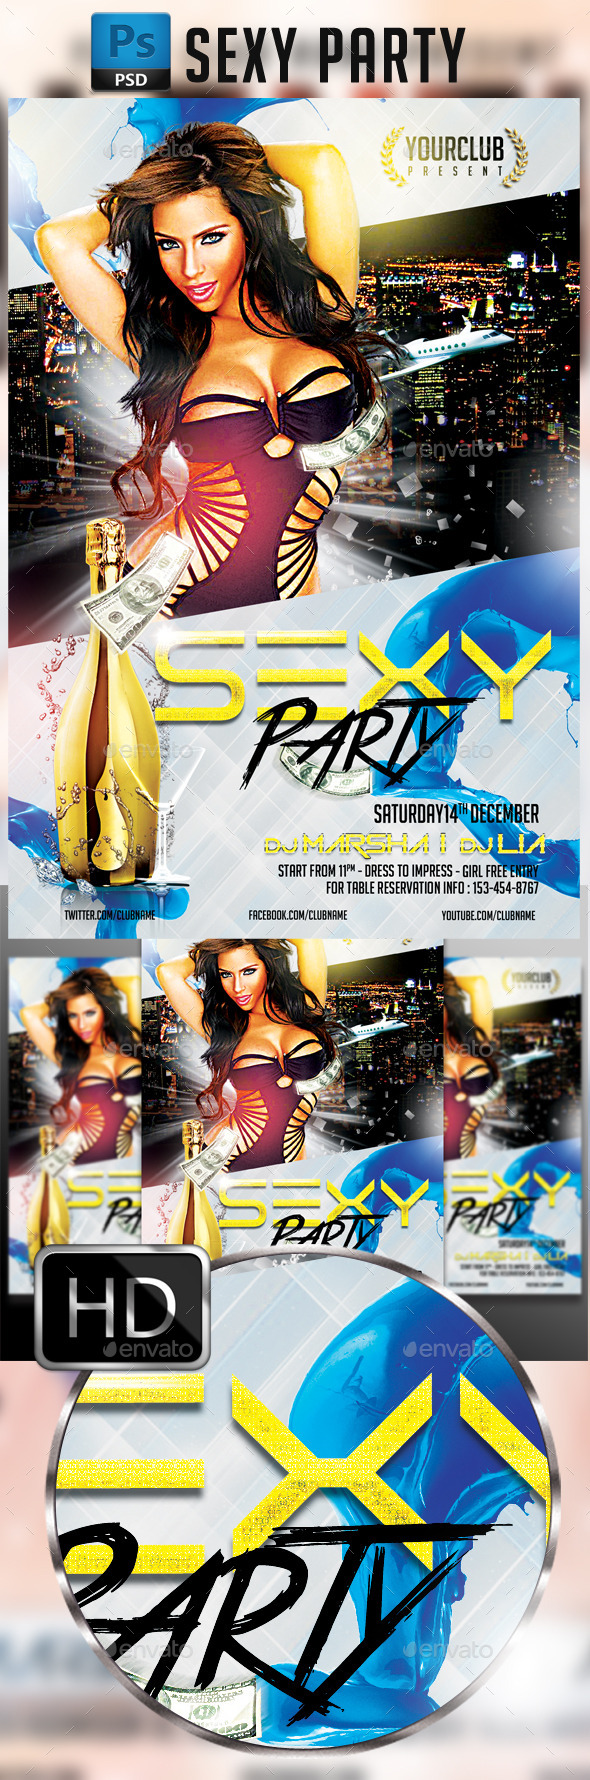 Sexy Night Party Flyer